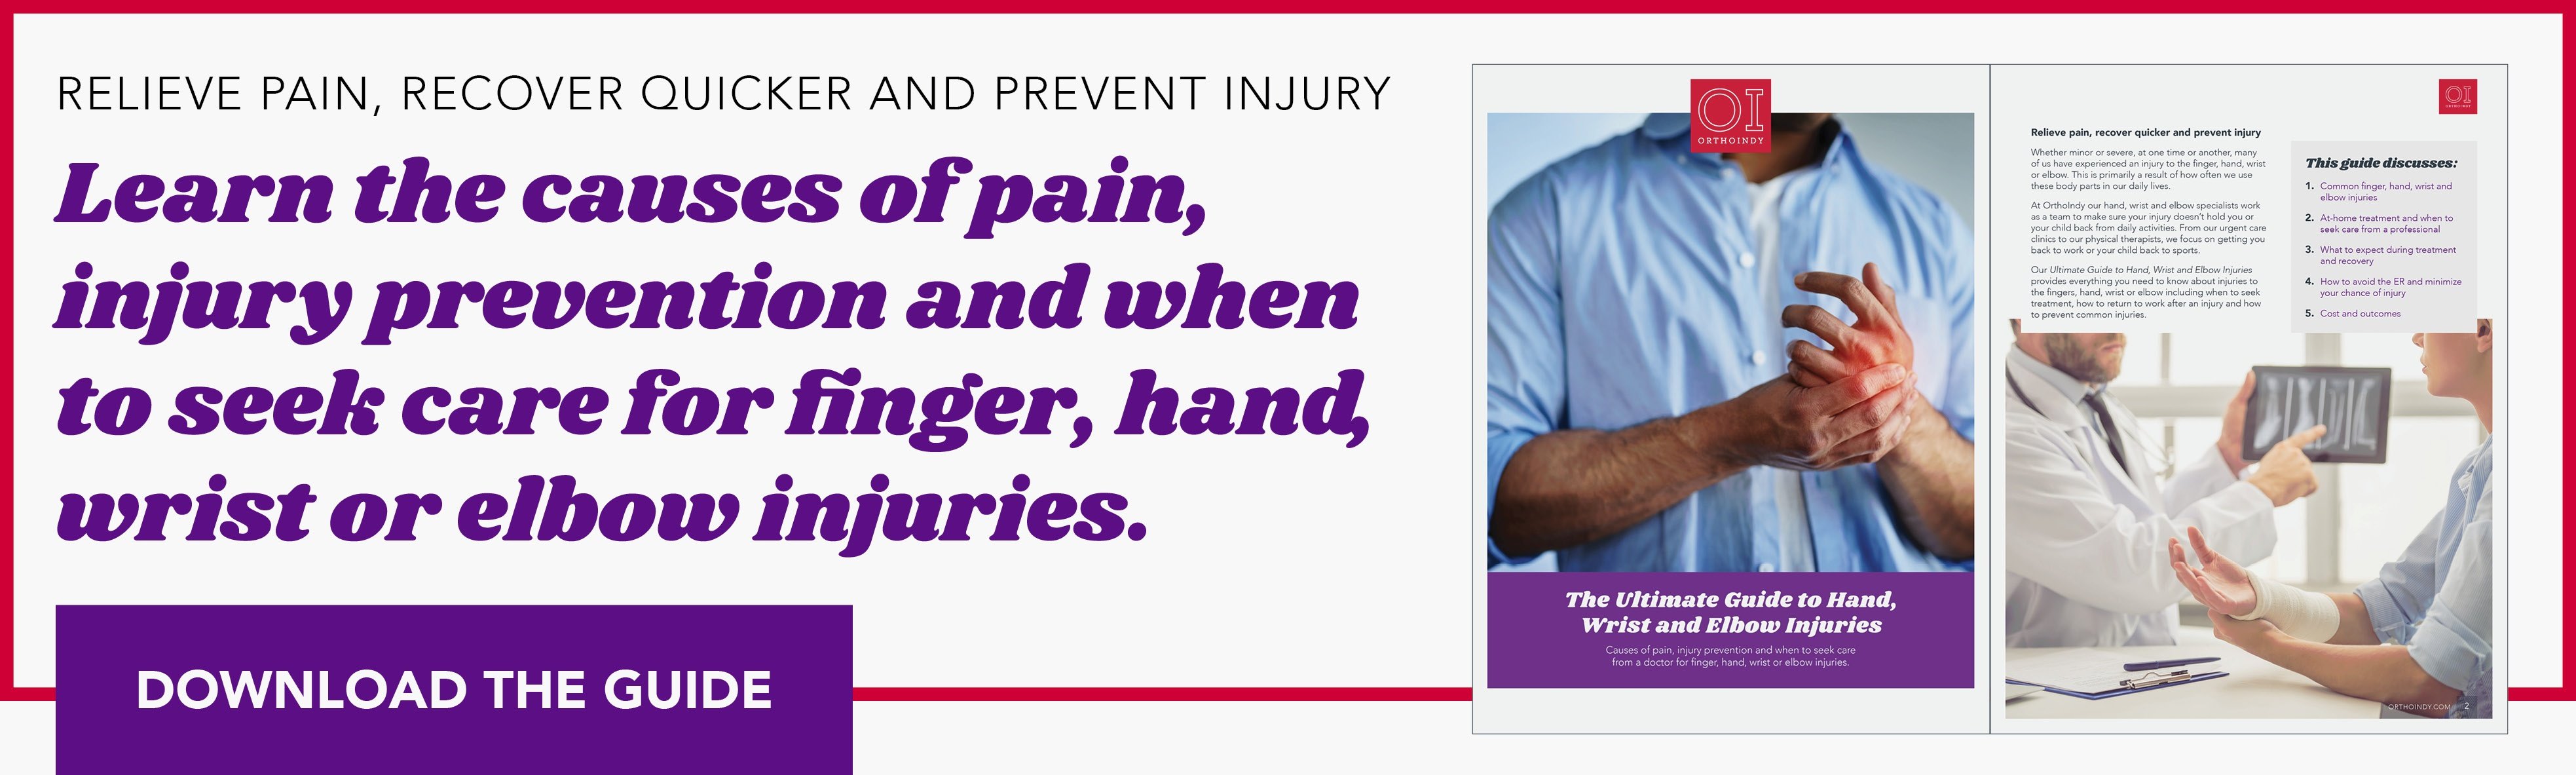 Relieve pain from hand, wrist or elbow injuries